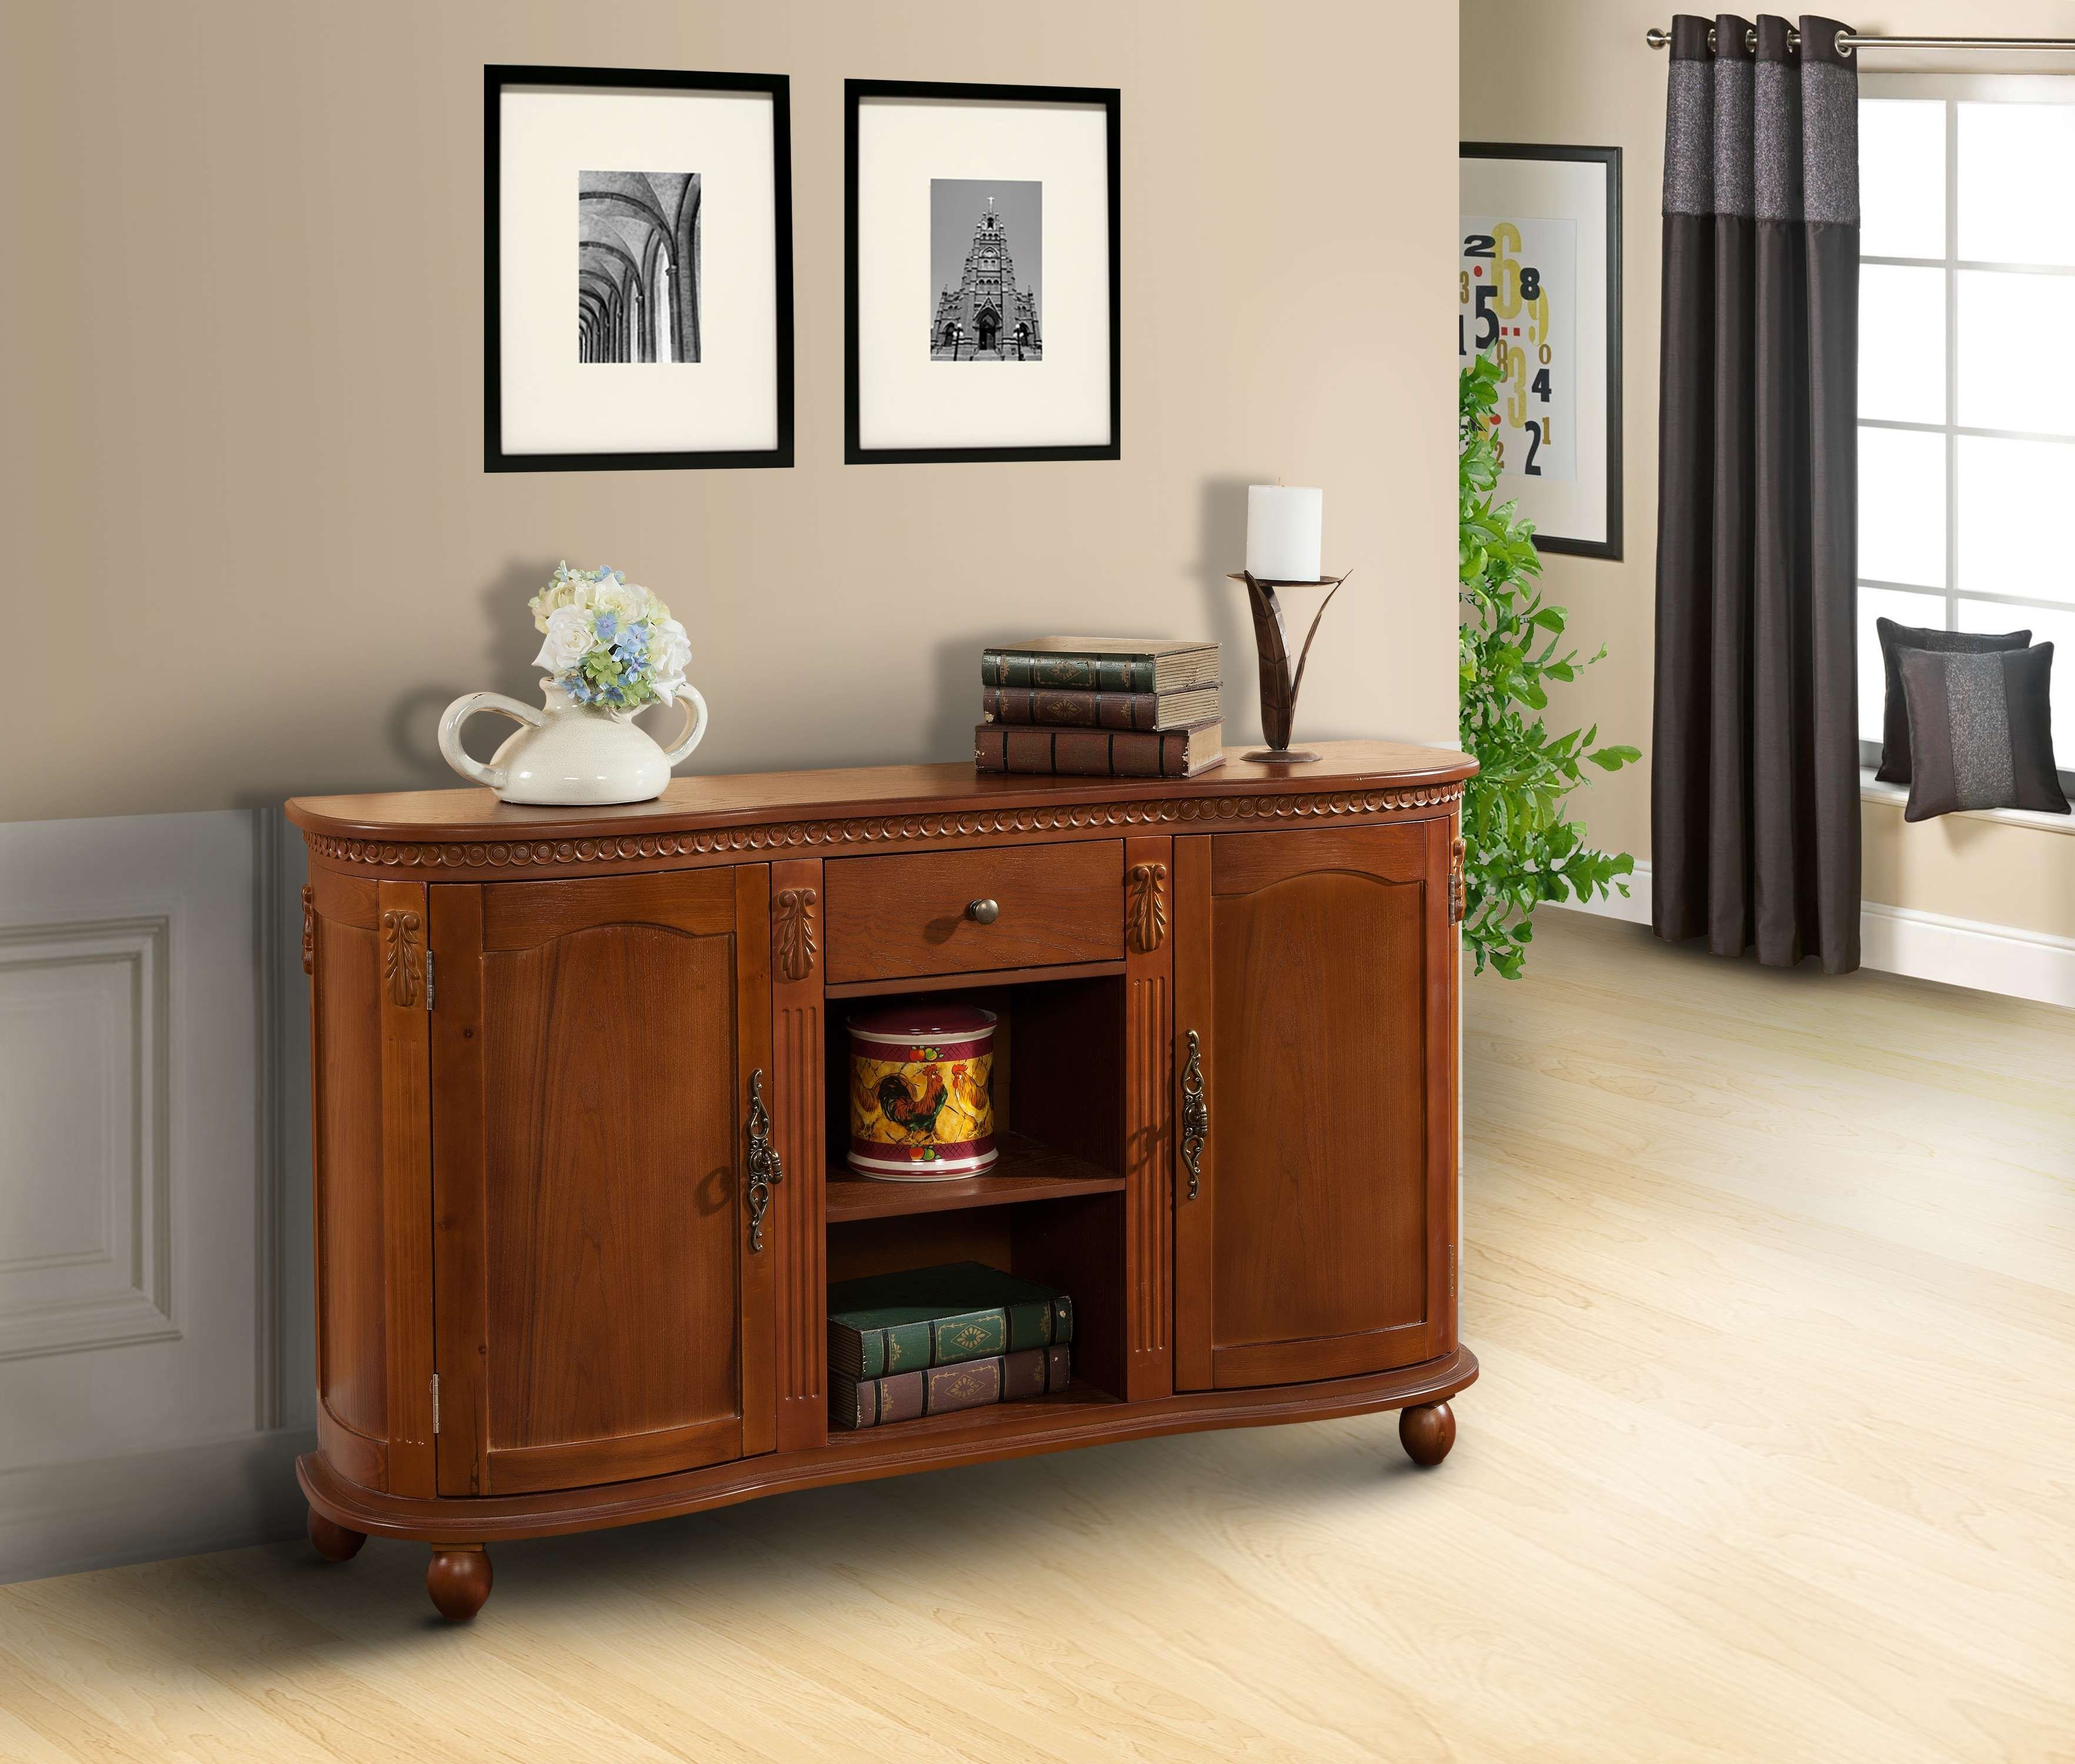 Beautiful Sideboard Buffet Table – Bjdgjy Intended For Sideboards Buffet Tables (View 18 of 20)